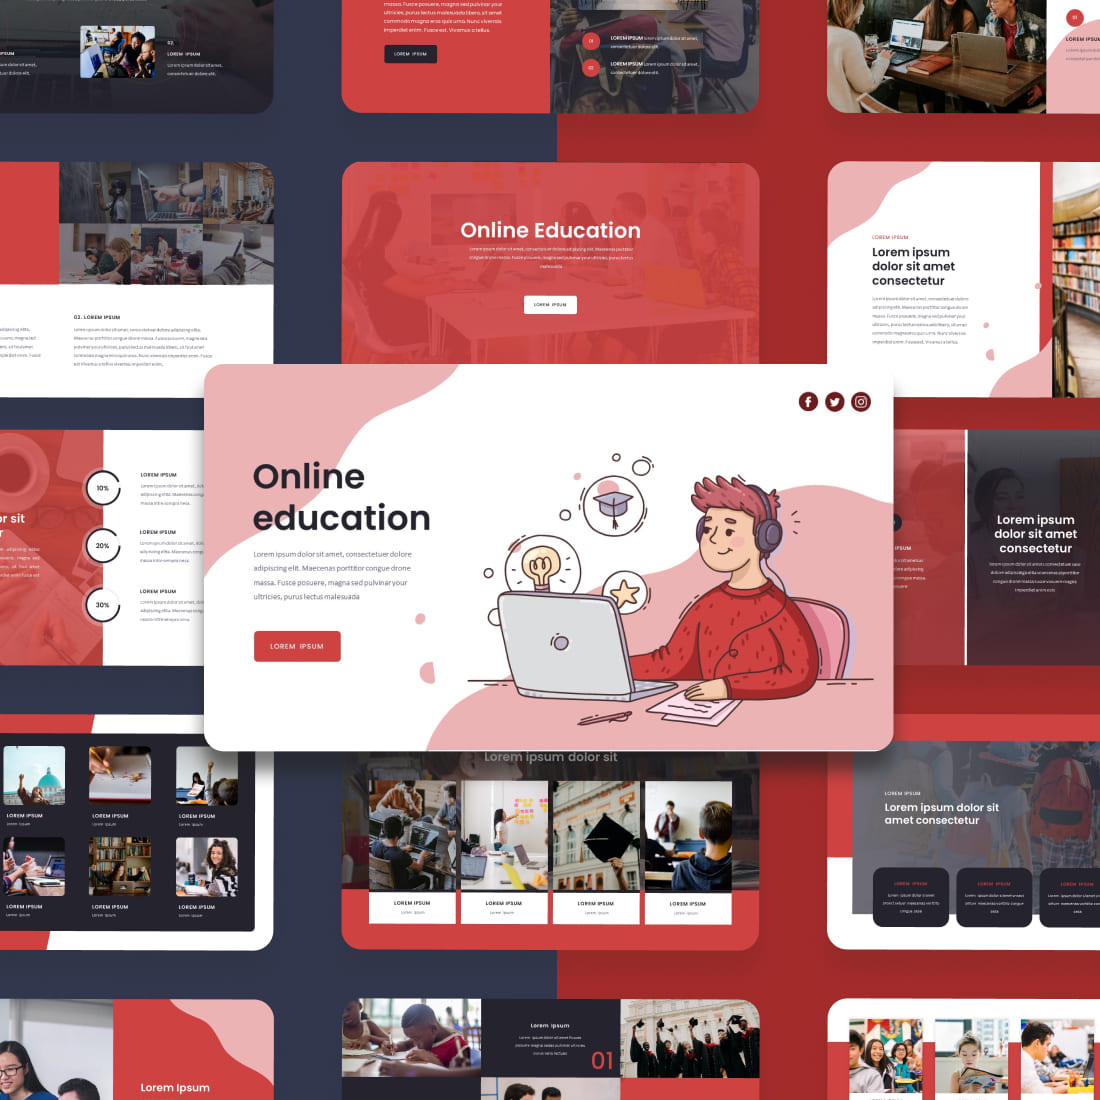 Online Education Powerpoint Template: 50 Slides cover.